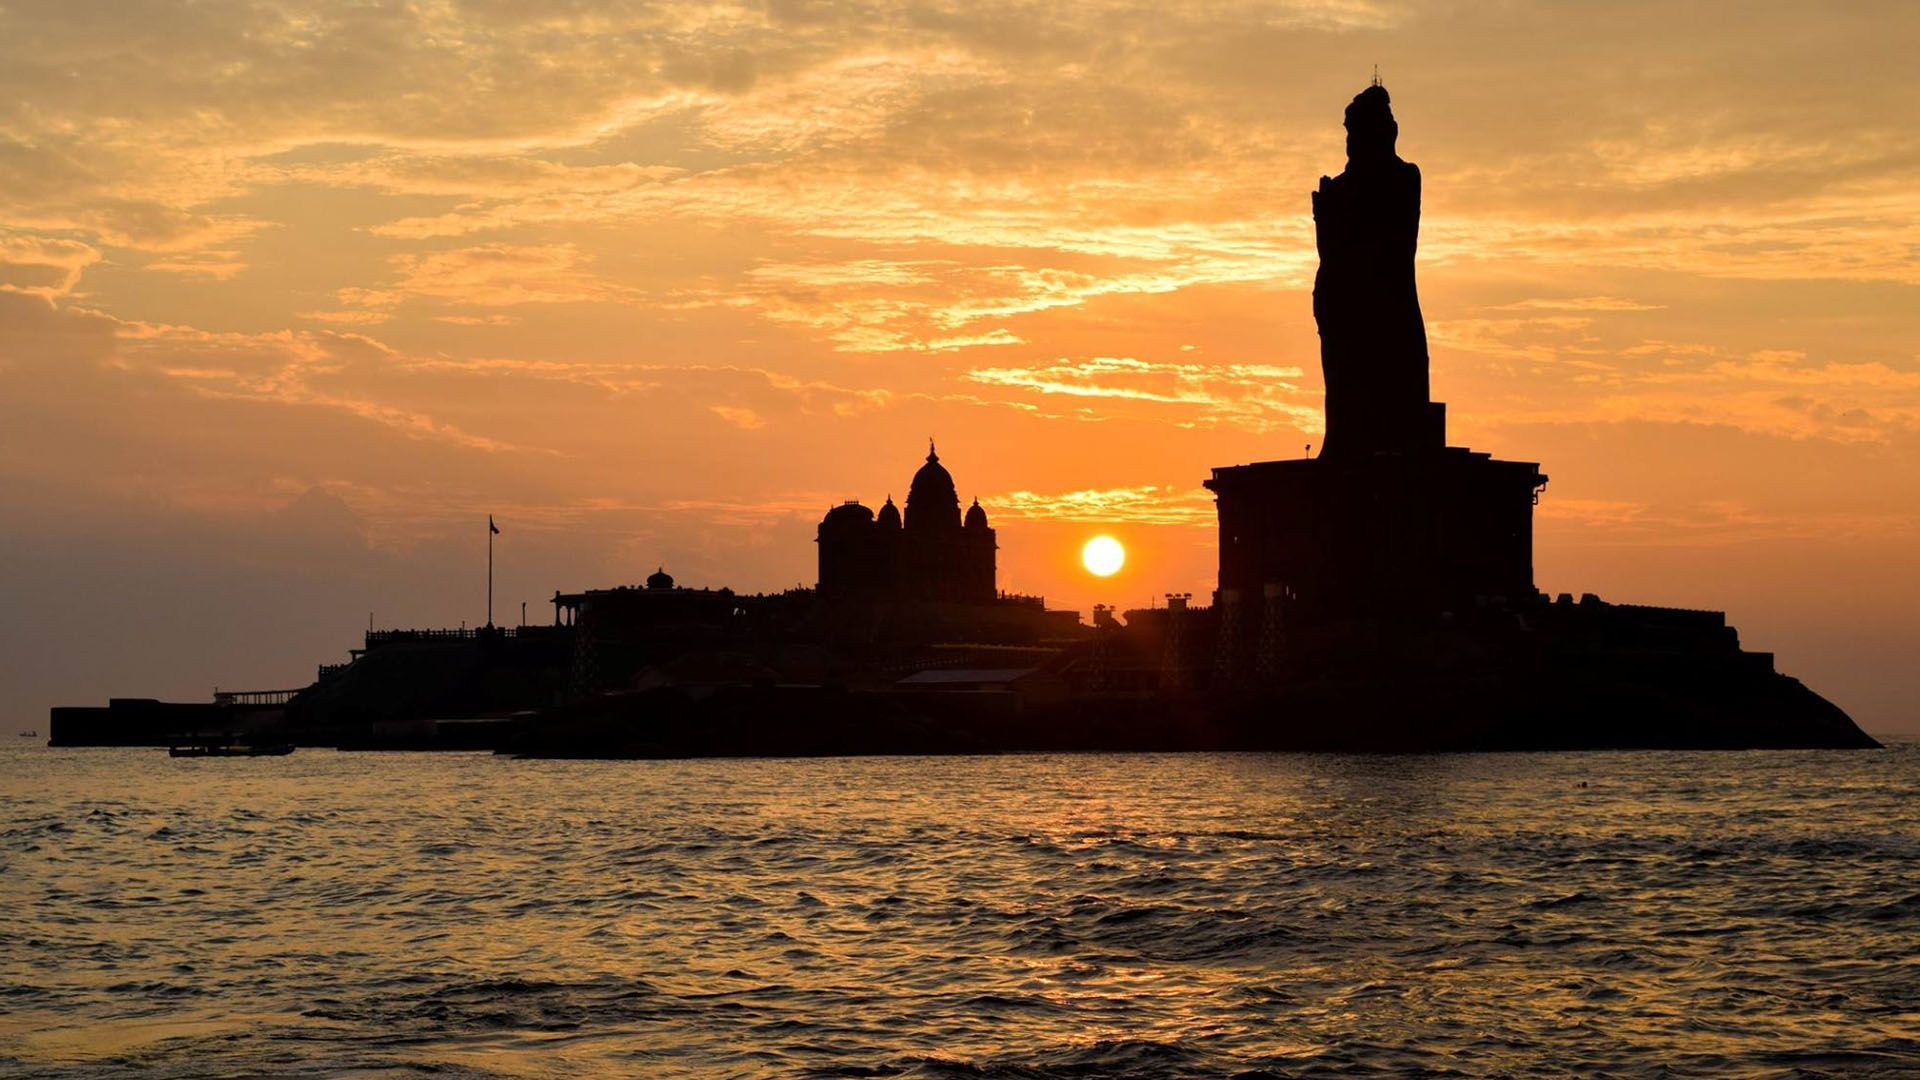 KANYAKUMARI A Must Visit Place Once in LIFETIME: Kanyakumari. Kanyakumari, Music albums, Heritage